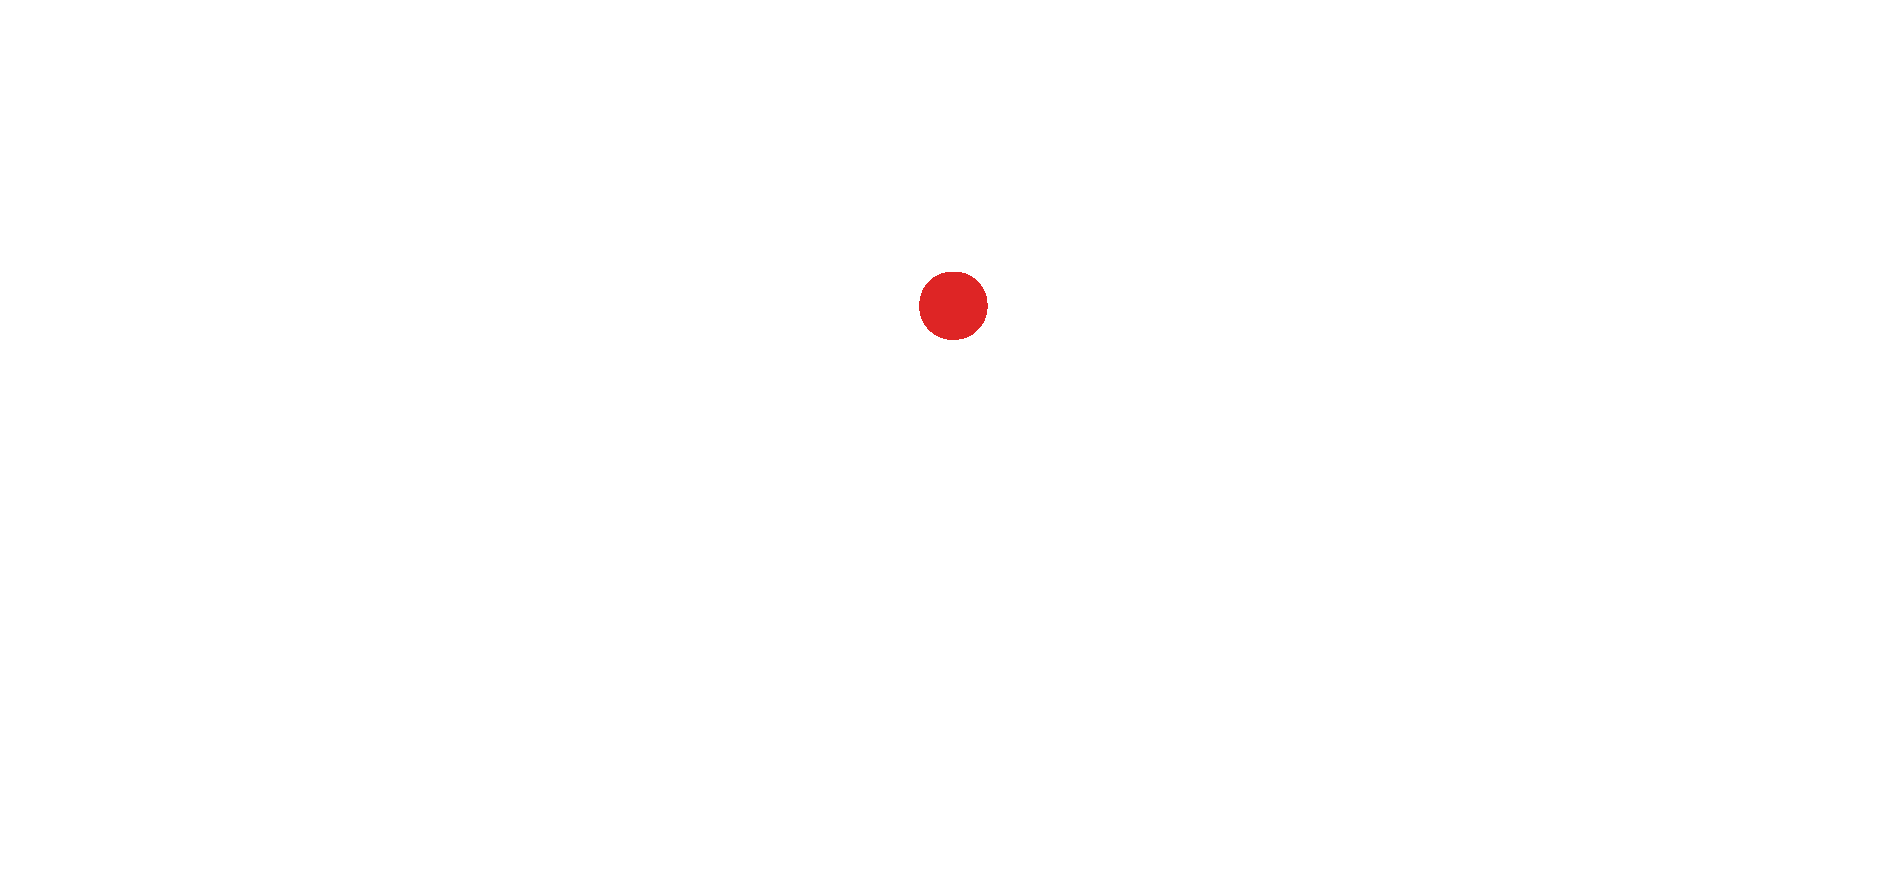 Steam Community :: Russian Roulette: One Life